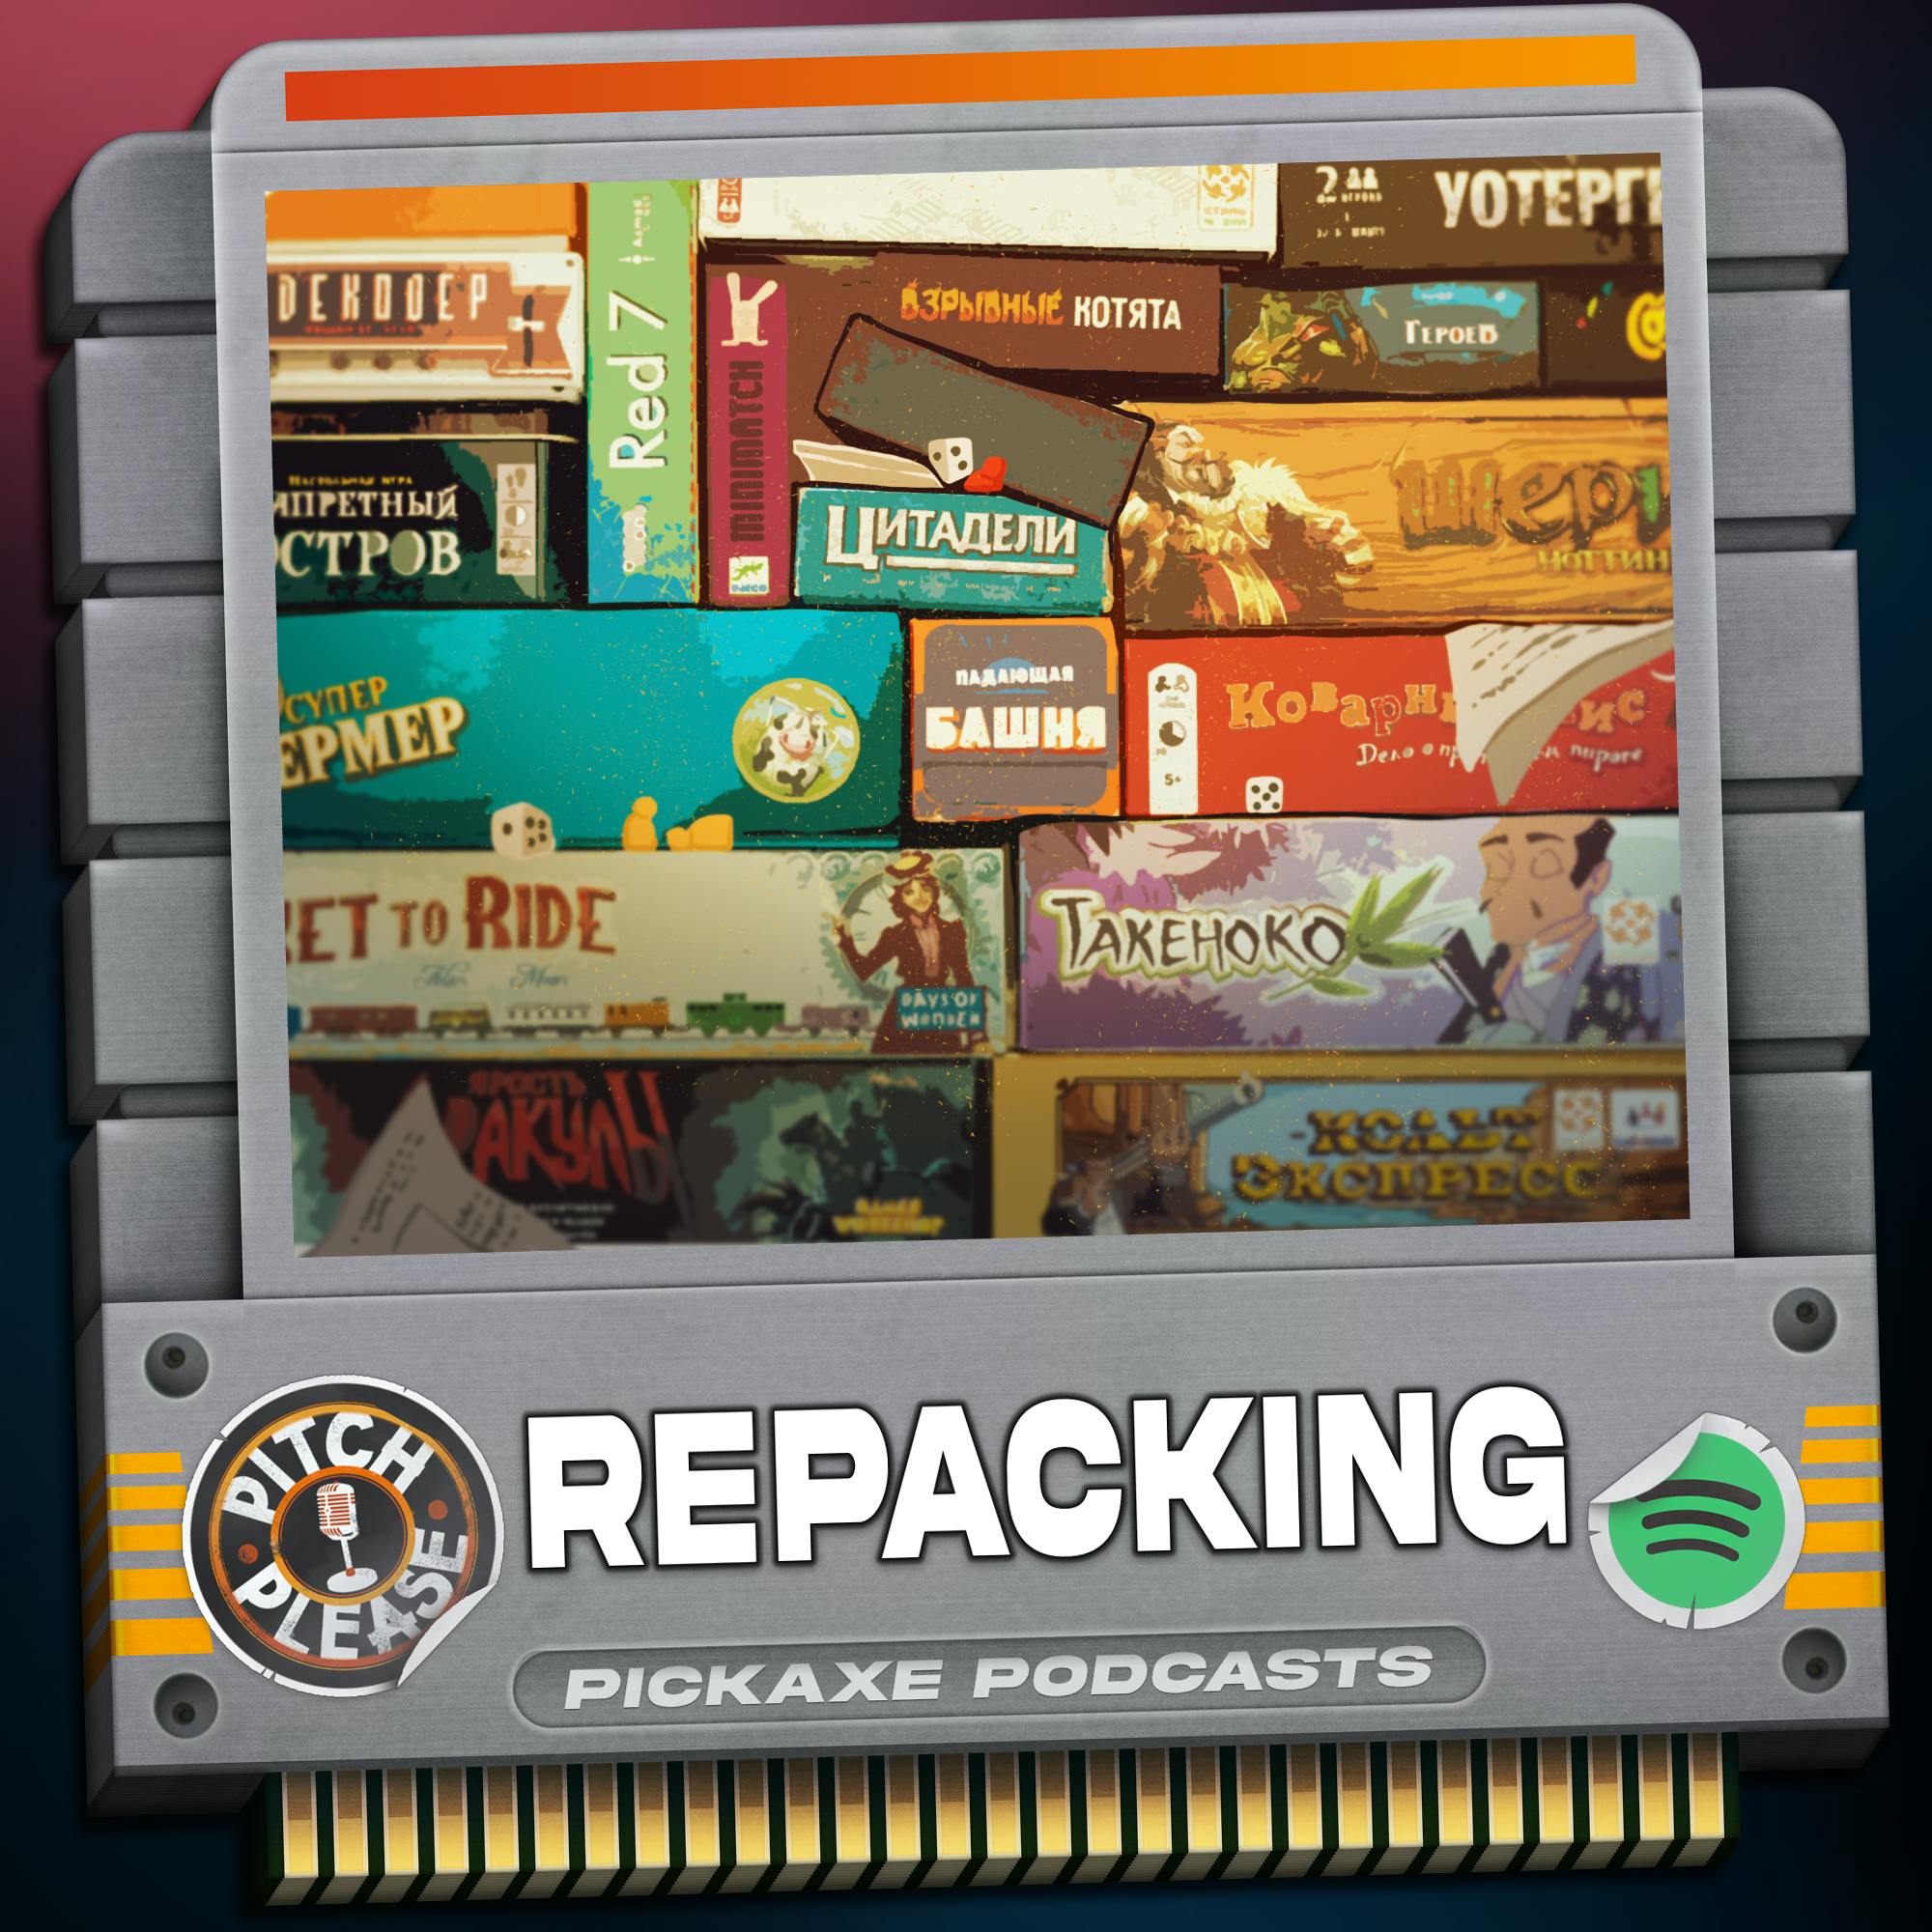 Pitch, Please - Repacking